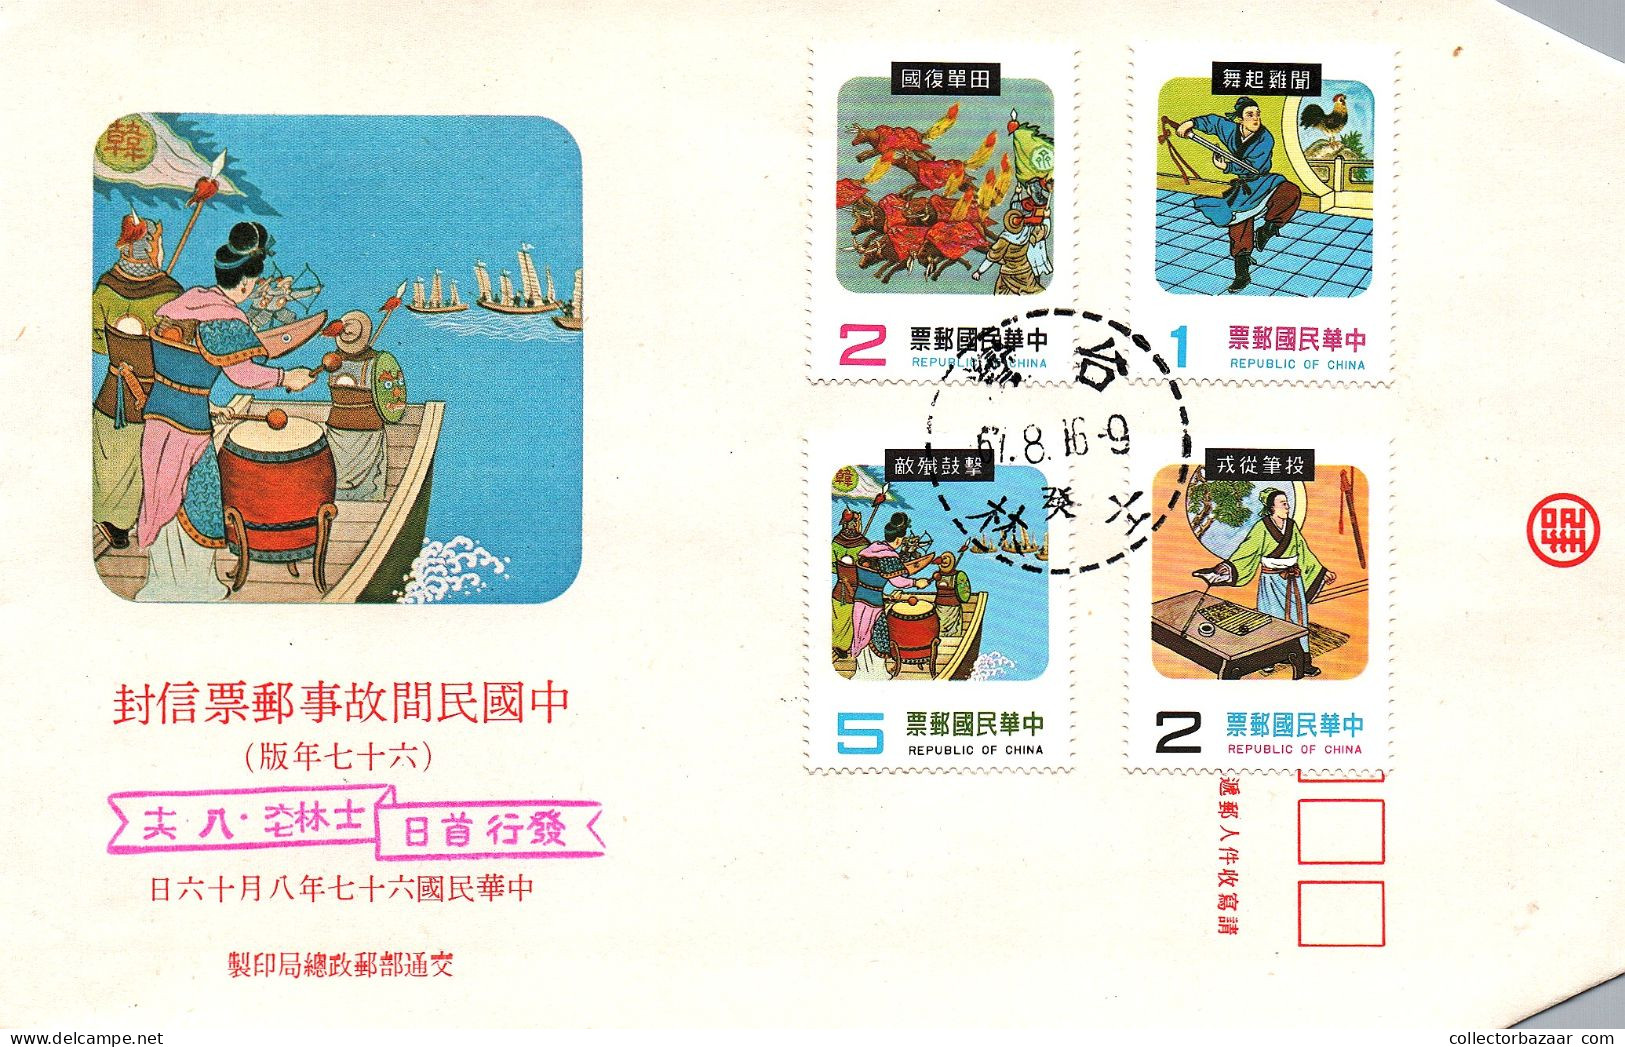 Taiwan Formosa Republic Of China FDC Different Traditional Activities -5$, 2$, 2$ And 1$ Stamps - FDC